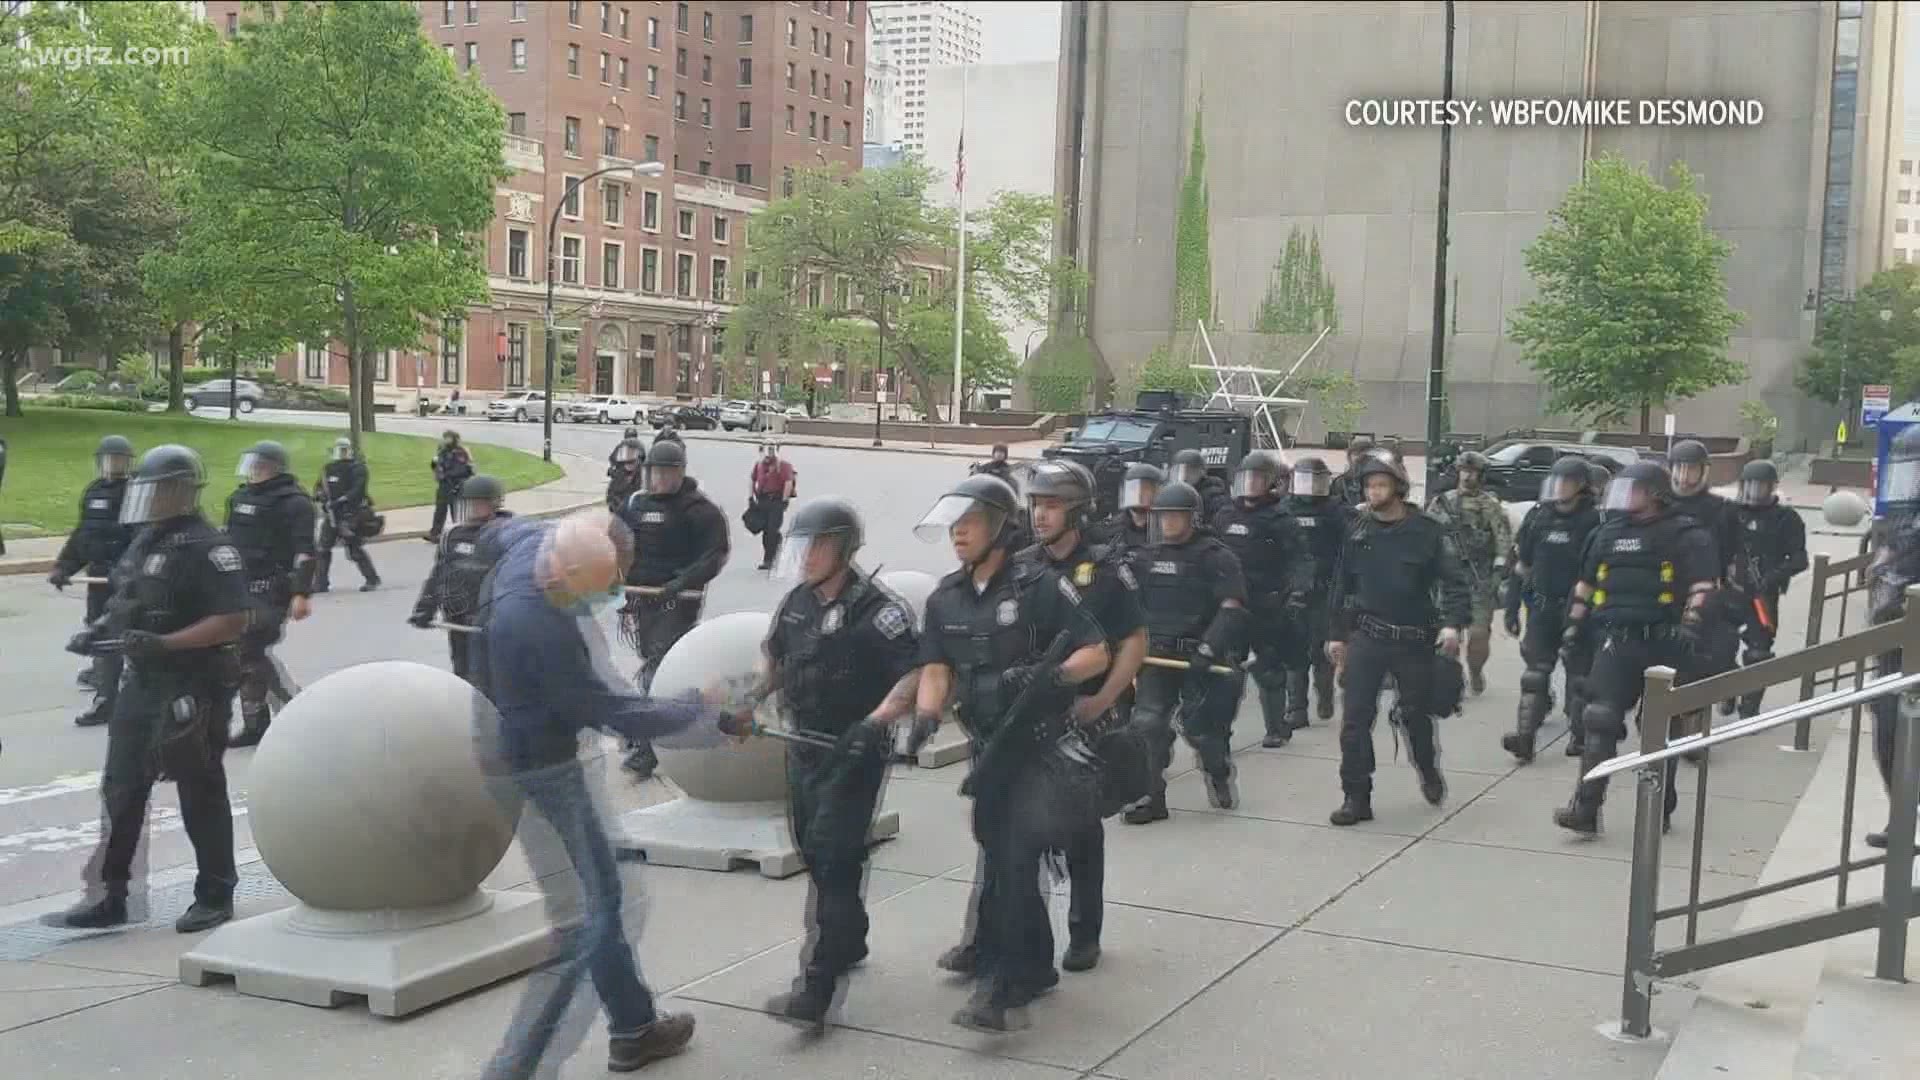 4c84cea1 299a 49ac a339 https://rexweyler.com/charges-dismissed-against-2-buffalo-police-officers-who-shoved-protester-in-june/